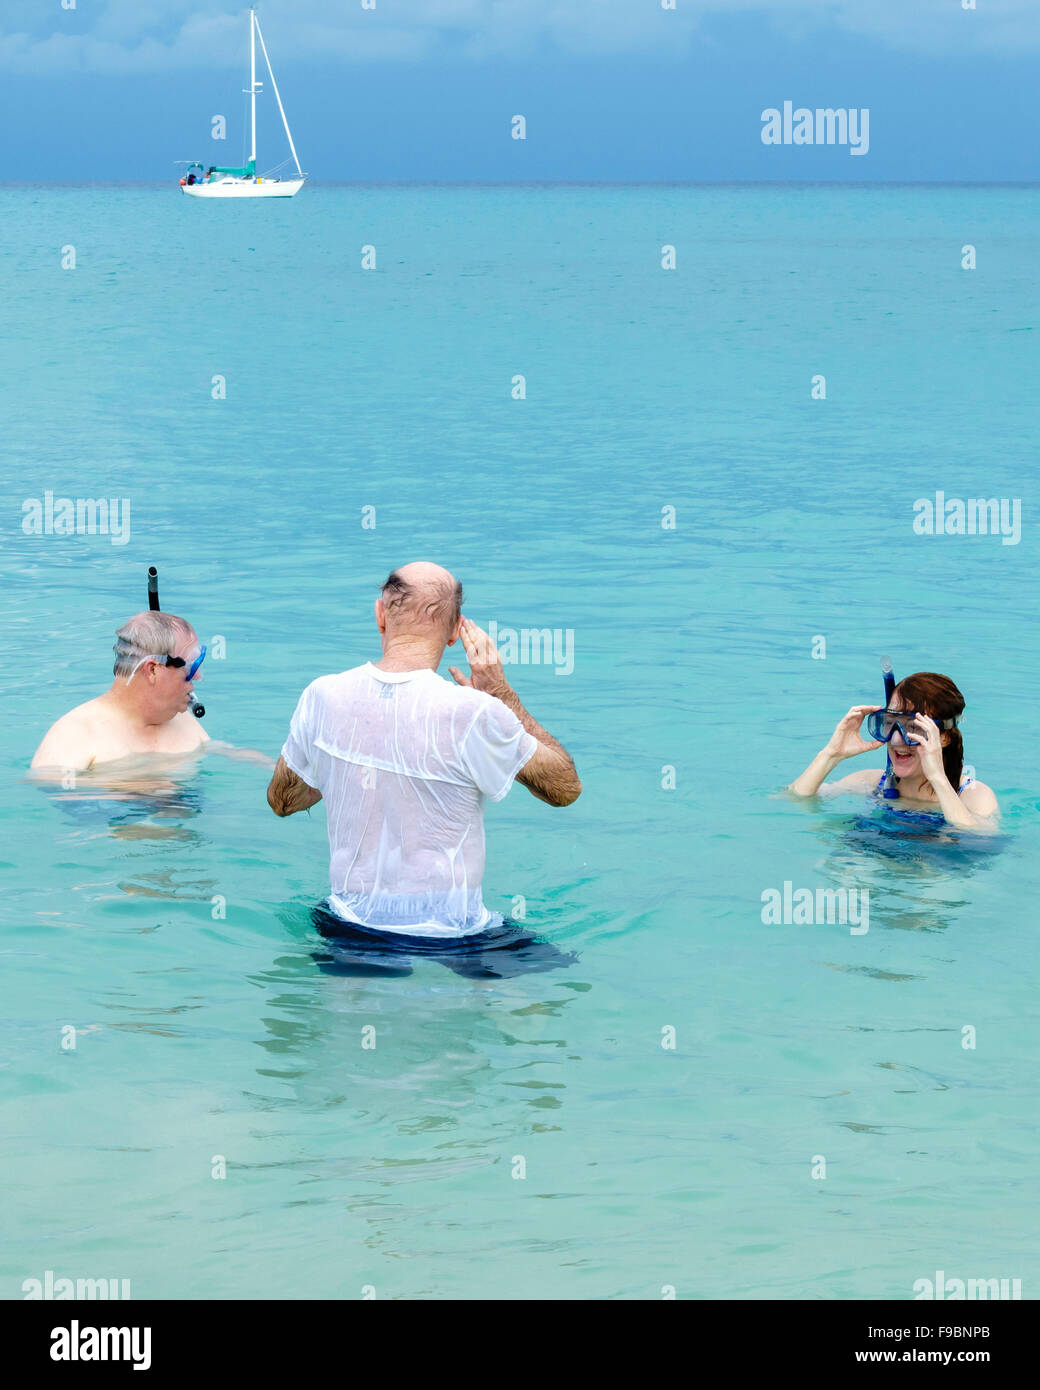 Three Caucasian family members ages 50-77 enjoy snorkeling in the Caribbean off St. Croix, U.S. Virgin Islands. Stock Photo